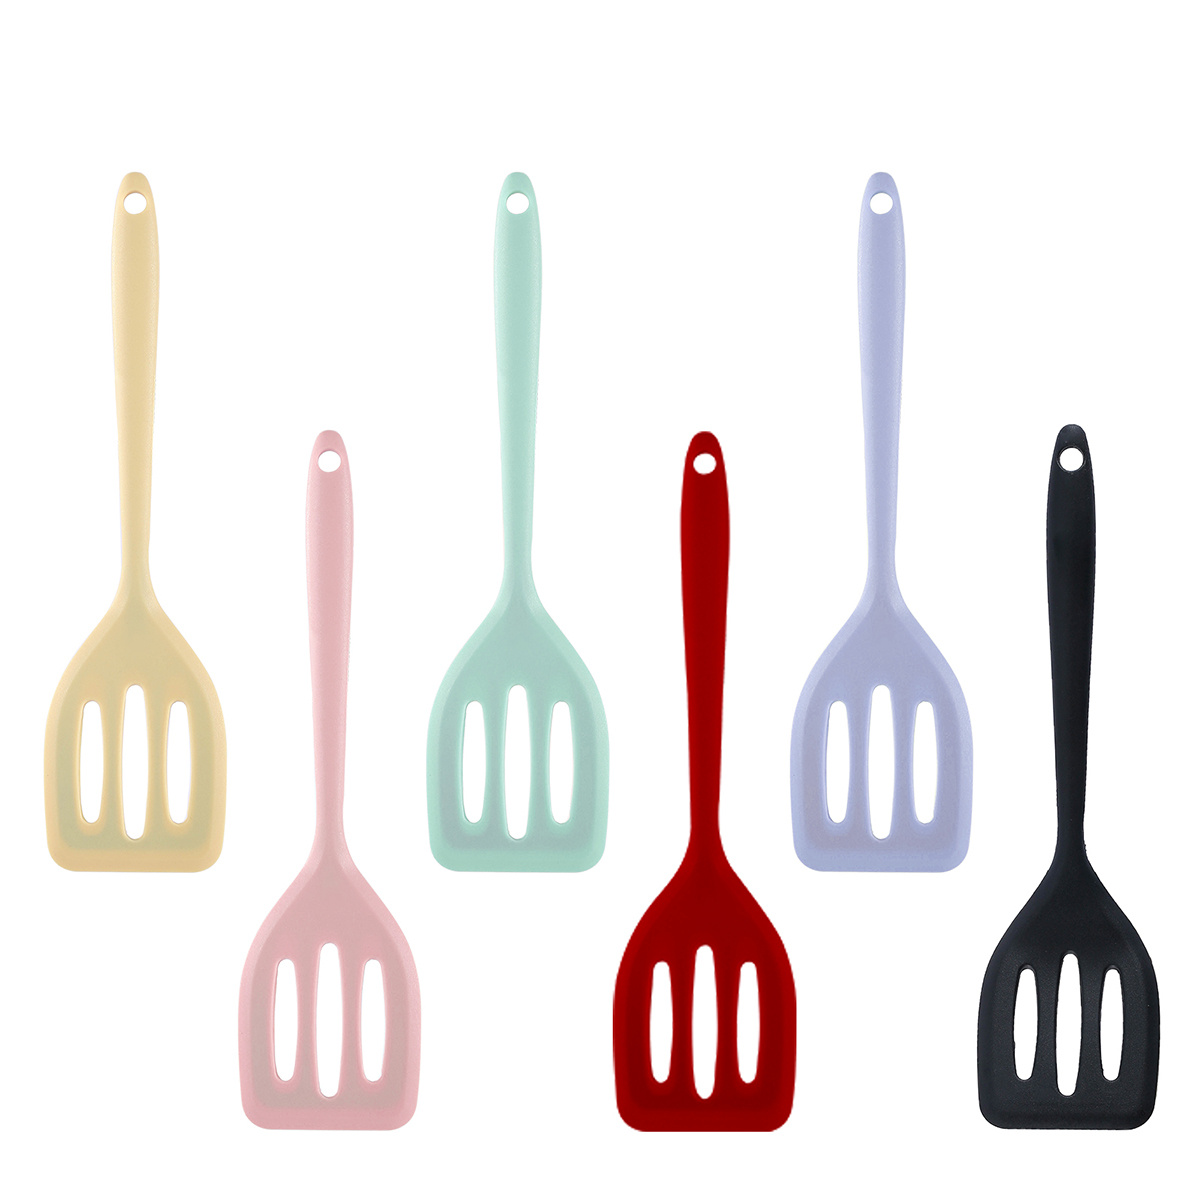 Small Silicone Spatula High Heat Resistant Slotted Turner Fish